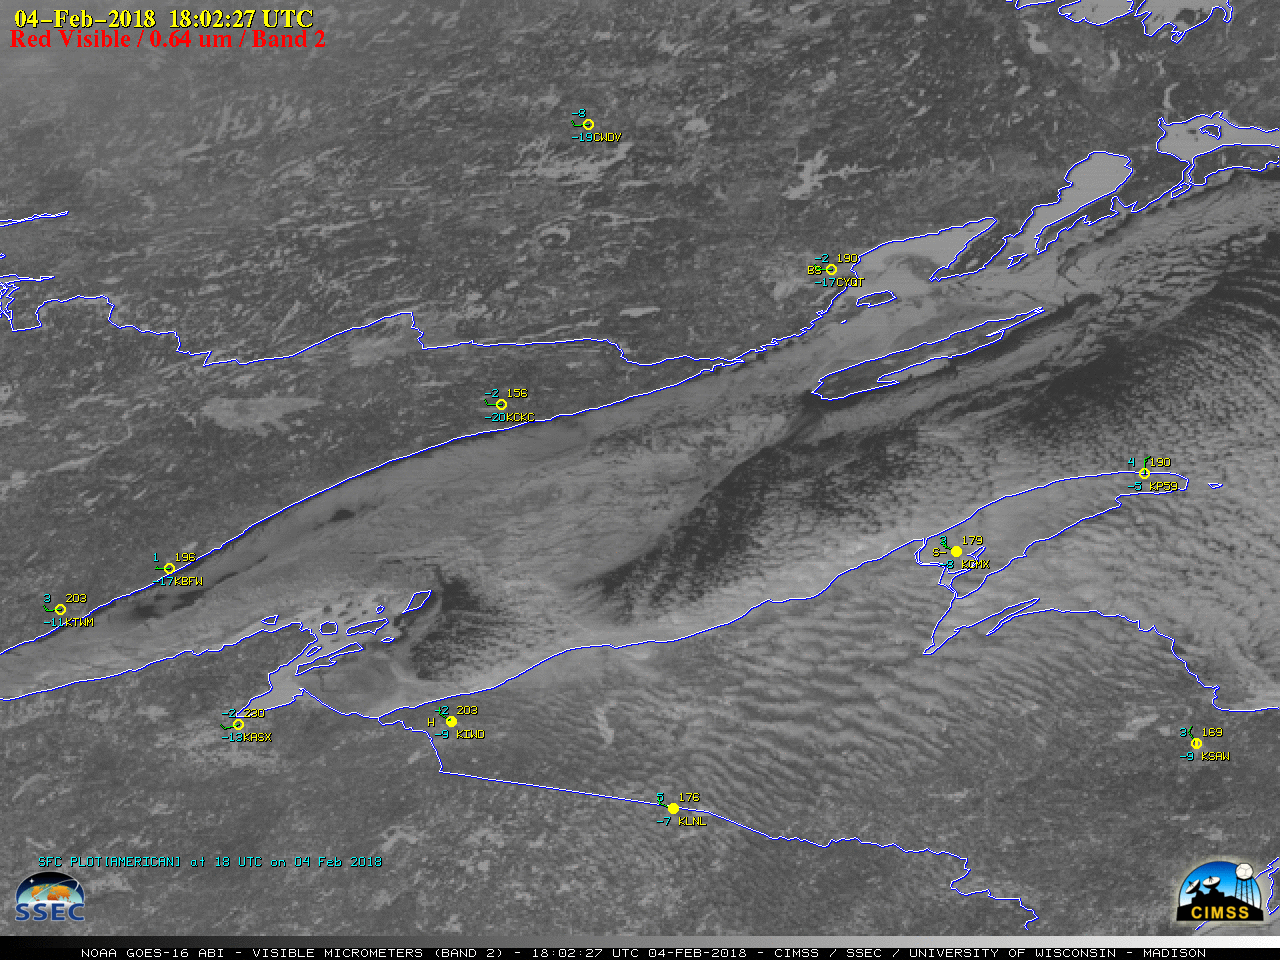 GOES-16 "Red" Visible (0.64 µm) images, with plots of hourly surface reports [click to play animation]